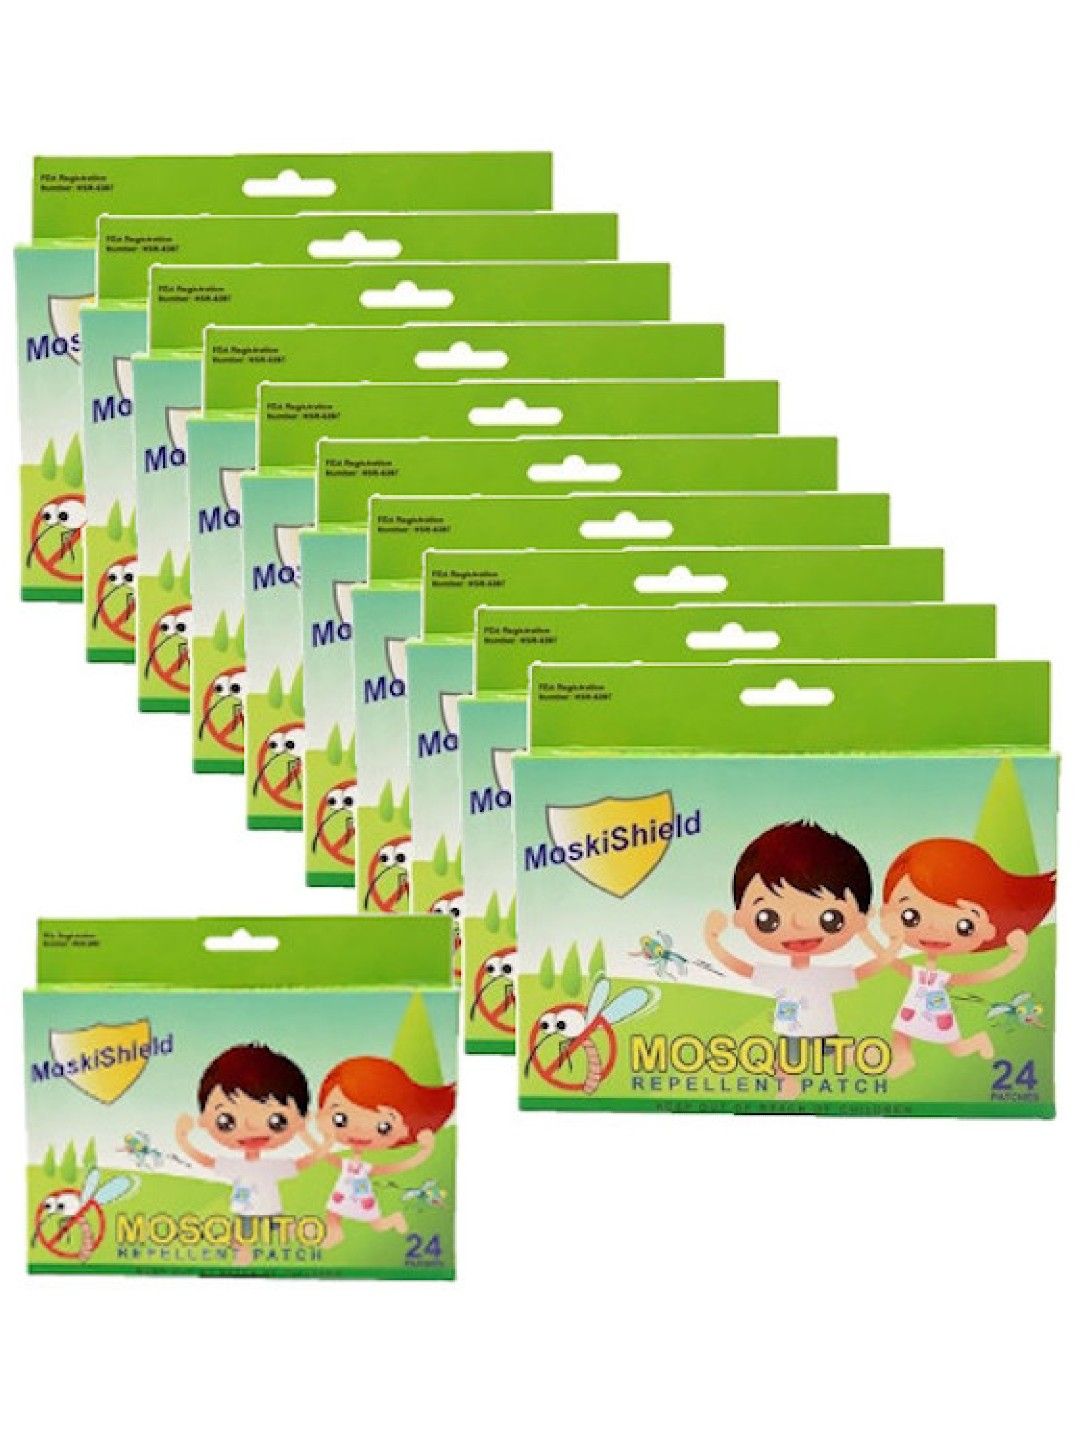 Moskishield Mosquito Repellent Patch (Set of 10) Free 1 Box (No Color- Image 1)